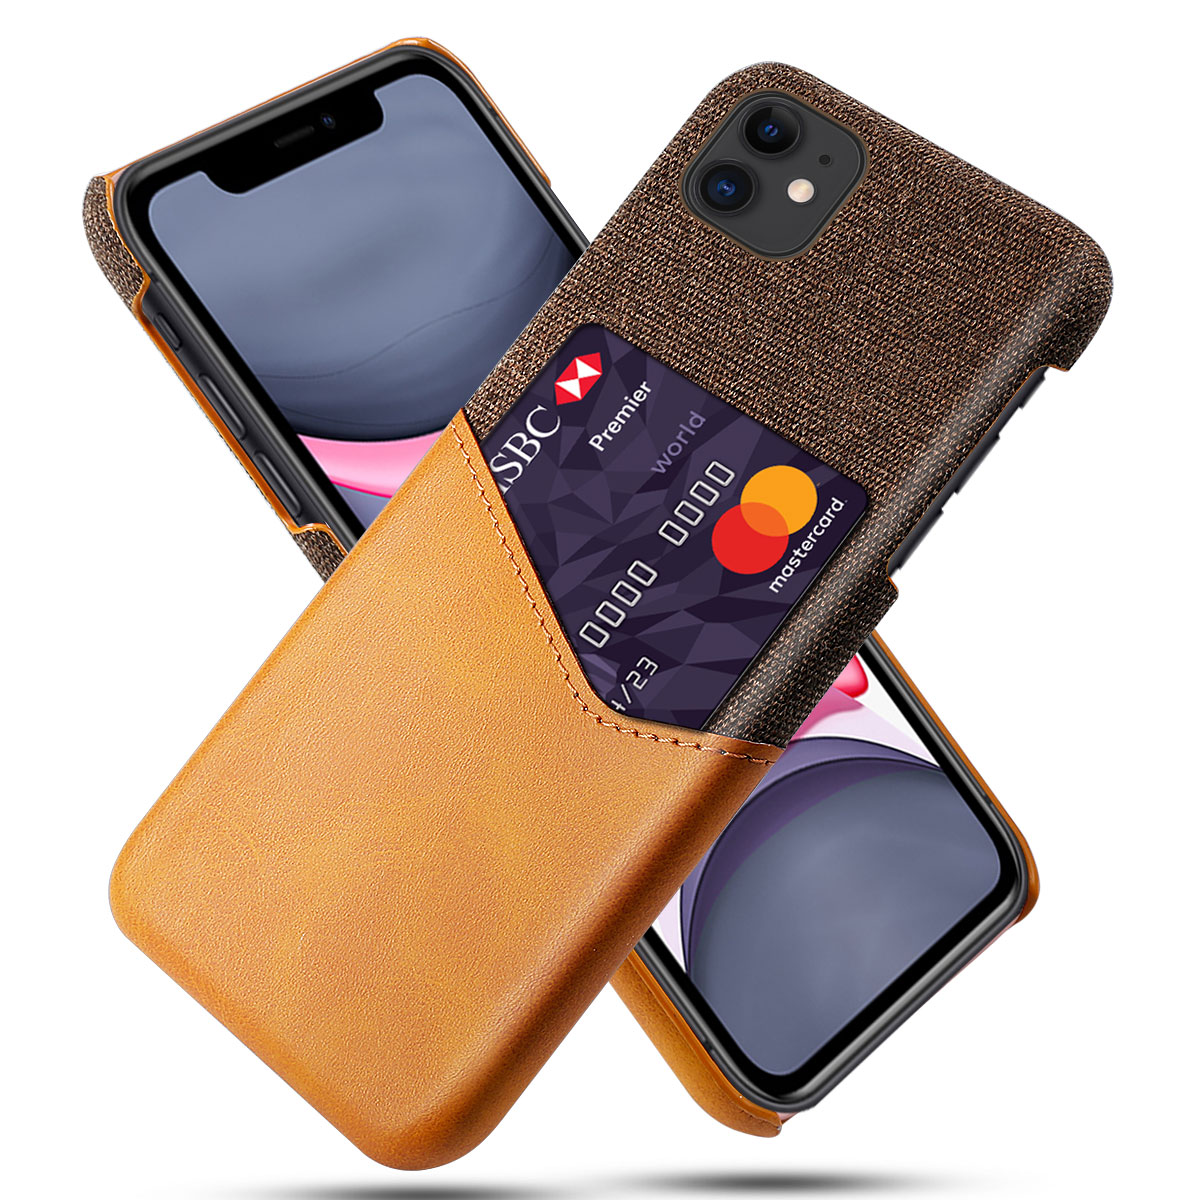 Bakeey-Luxury-PU-Leather-Cloth-with-Card-Slot-Shockproof-Anti-scratch-Protective-Case-for-iPhone-11--1610637-5